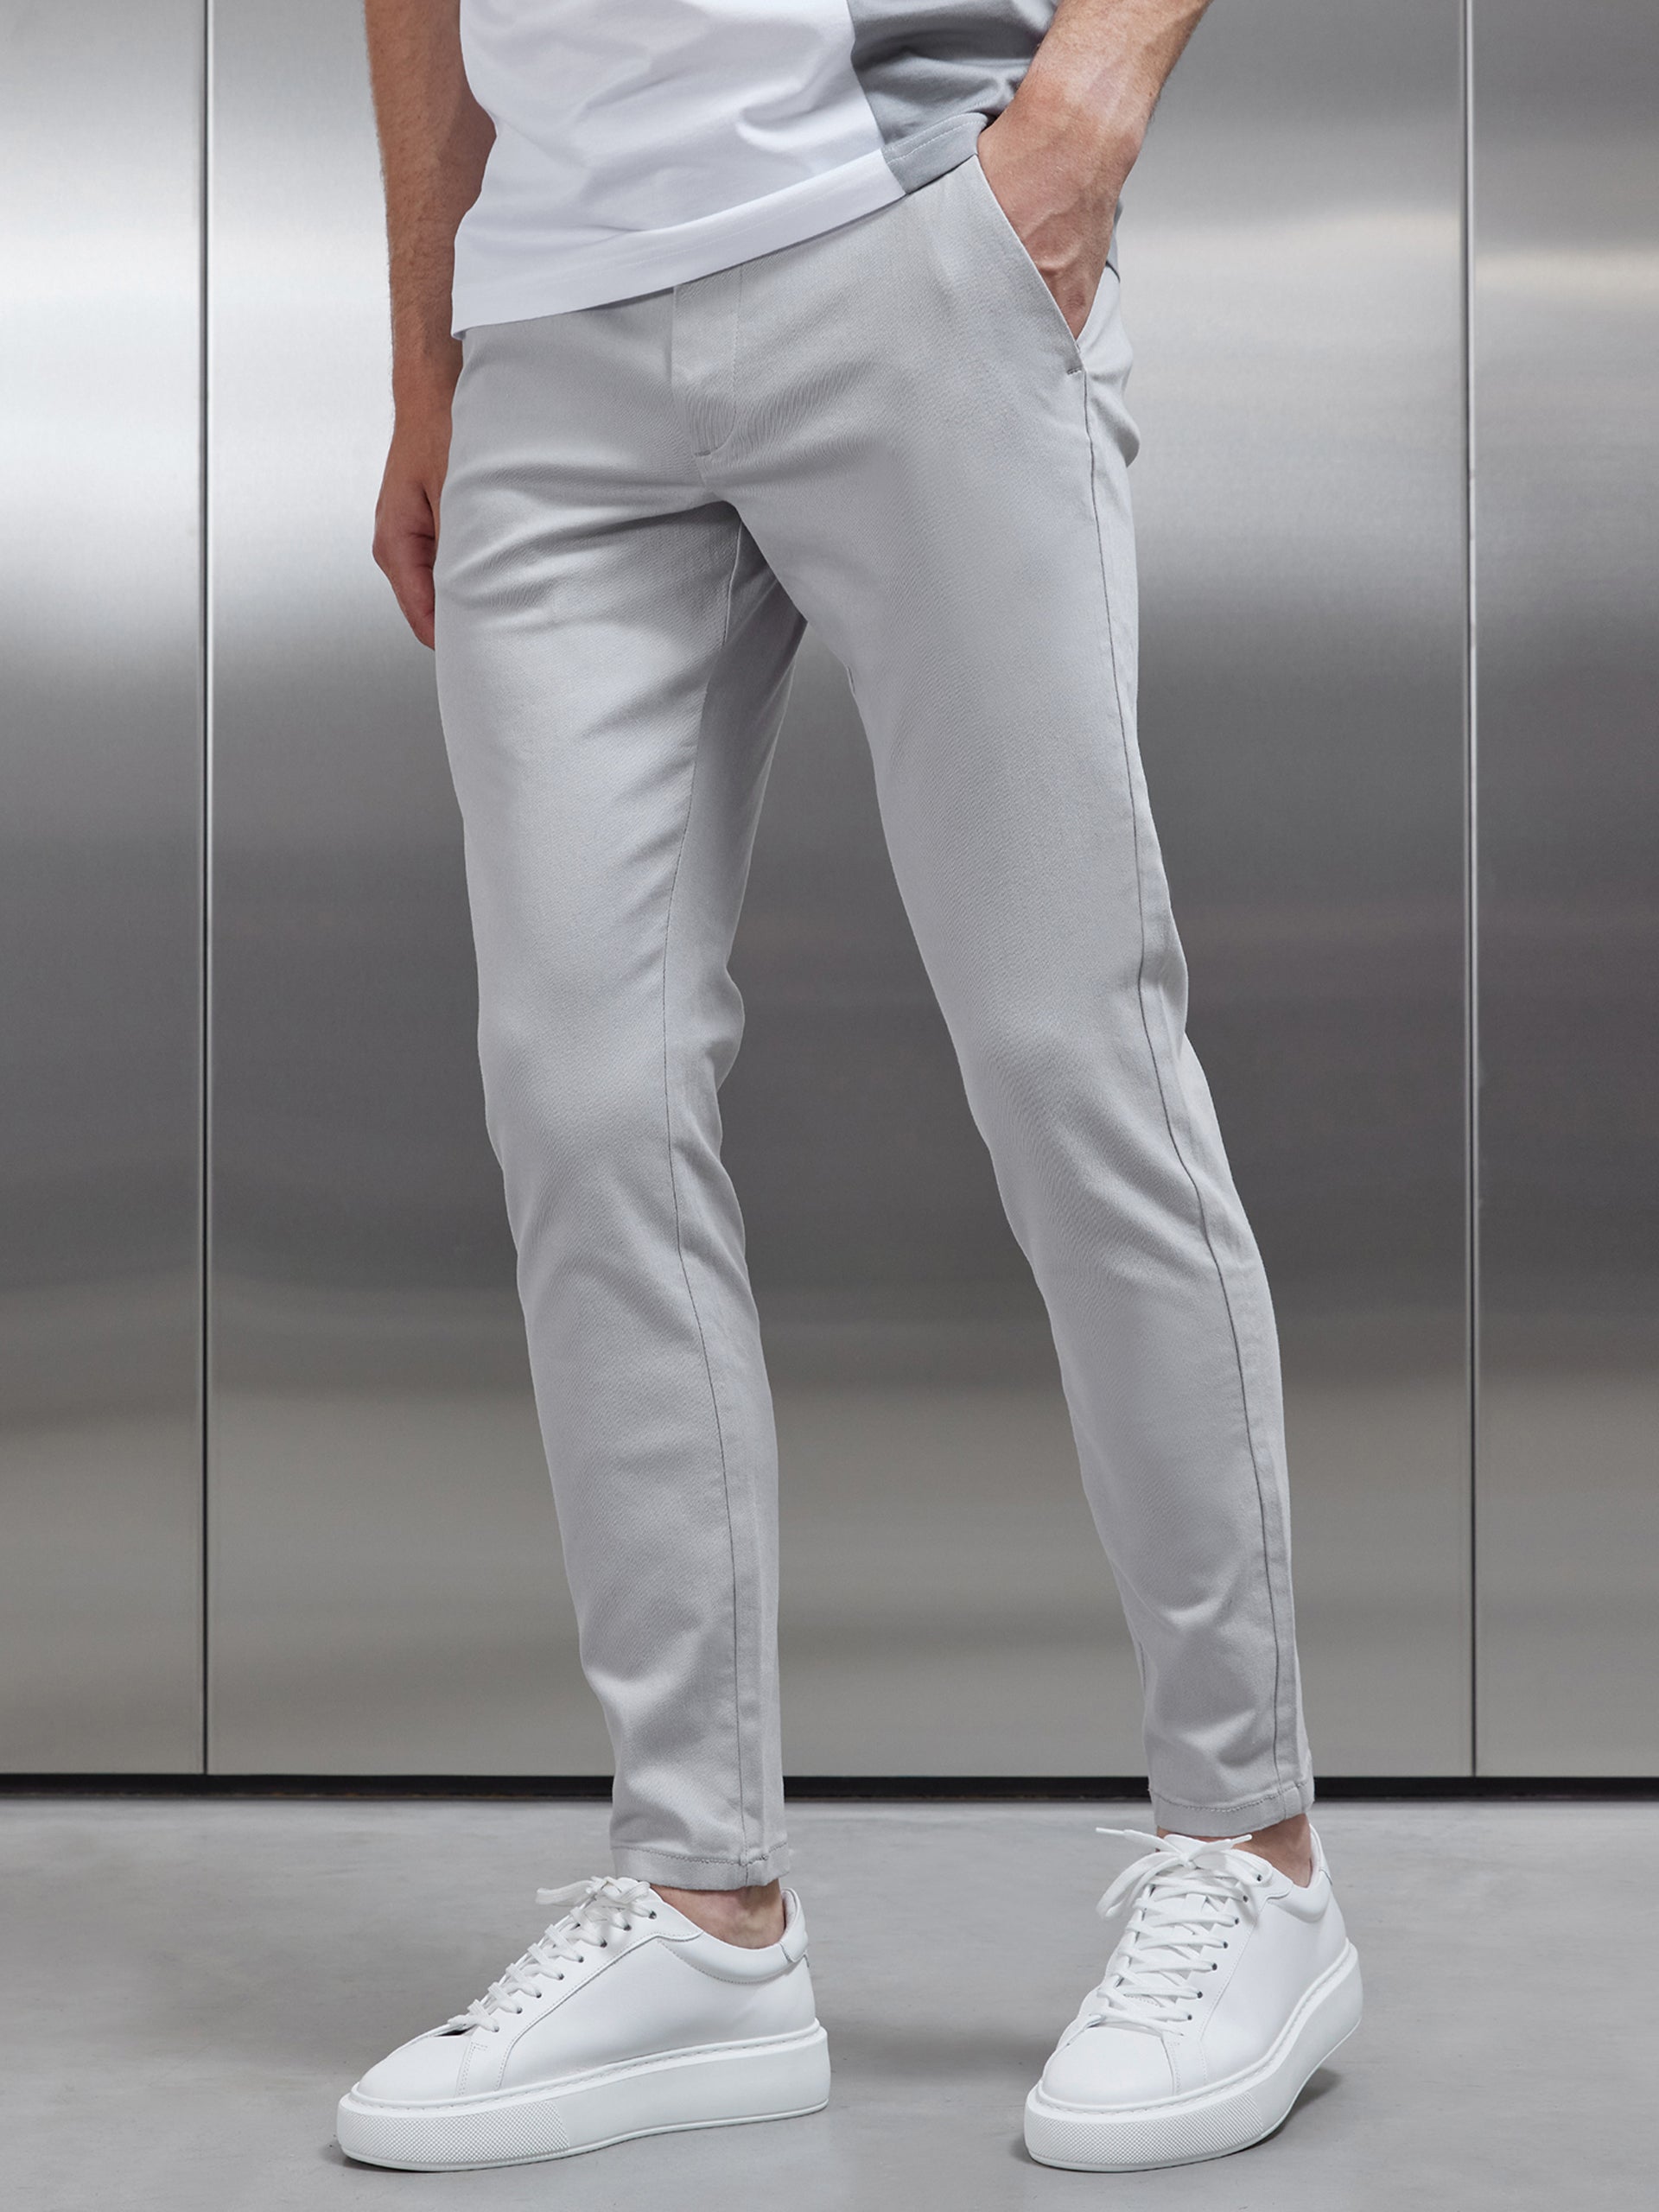 Grey Chino Pants|men's Summer Breathable Chino Pants - Stretch Nylon Slim  Fit Straight Trousers